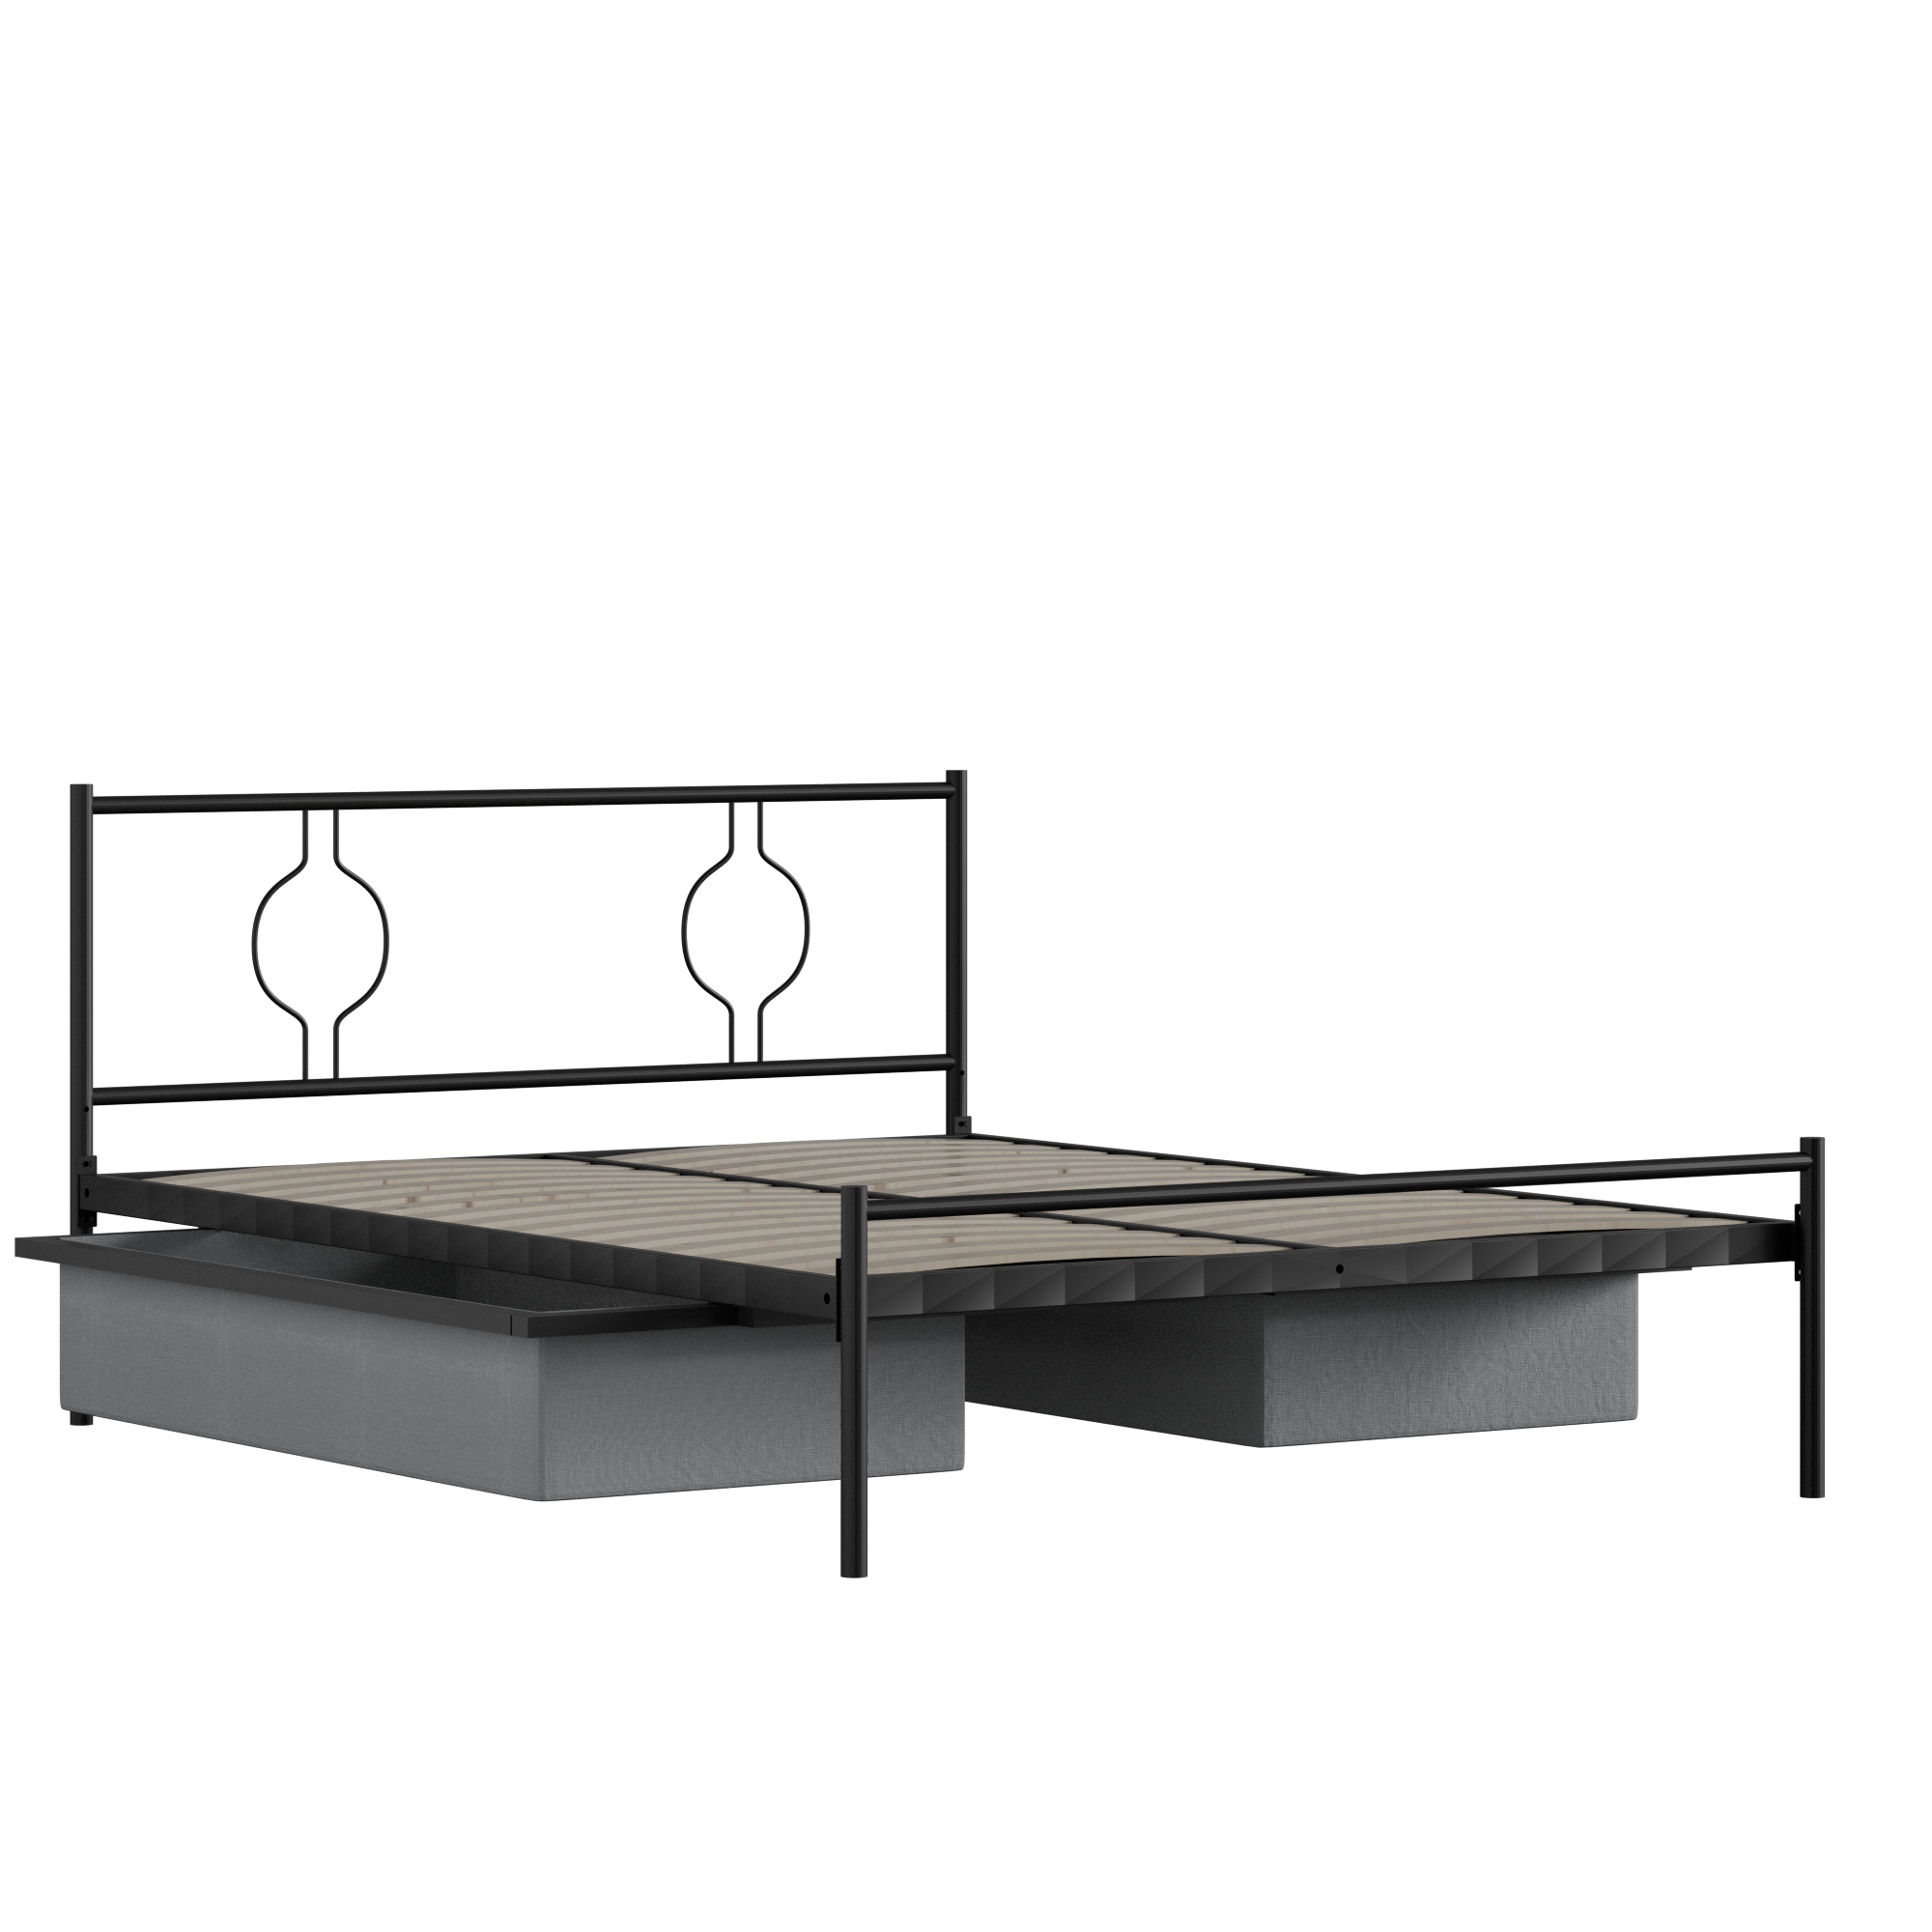 Meiji iron/metal bed in black with drawers